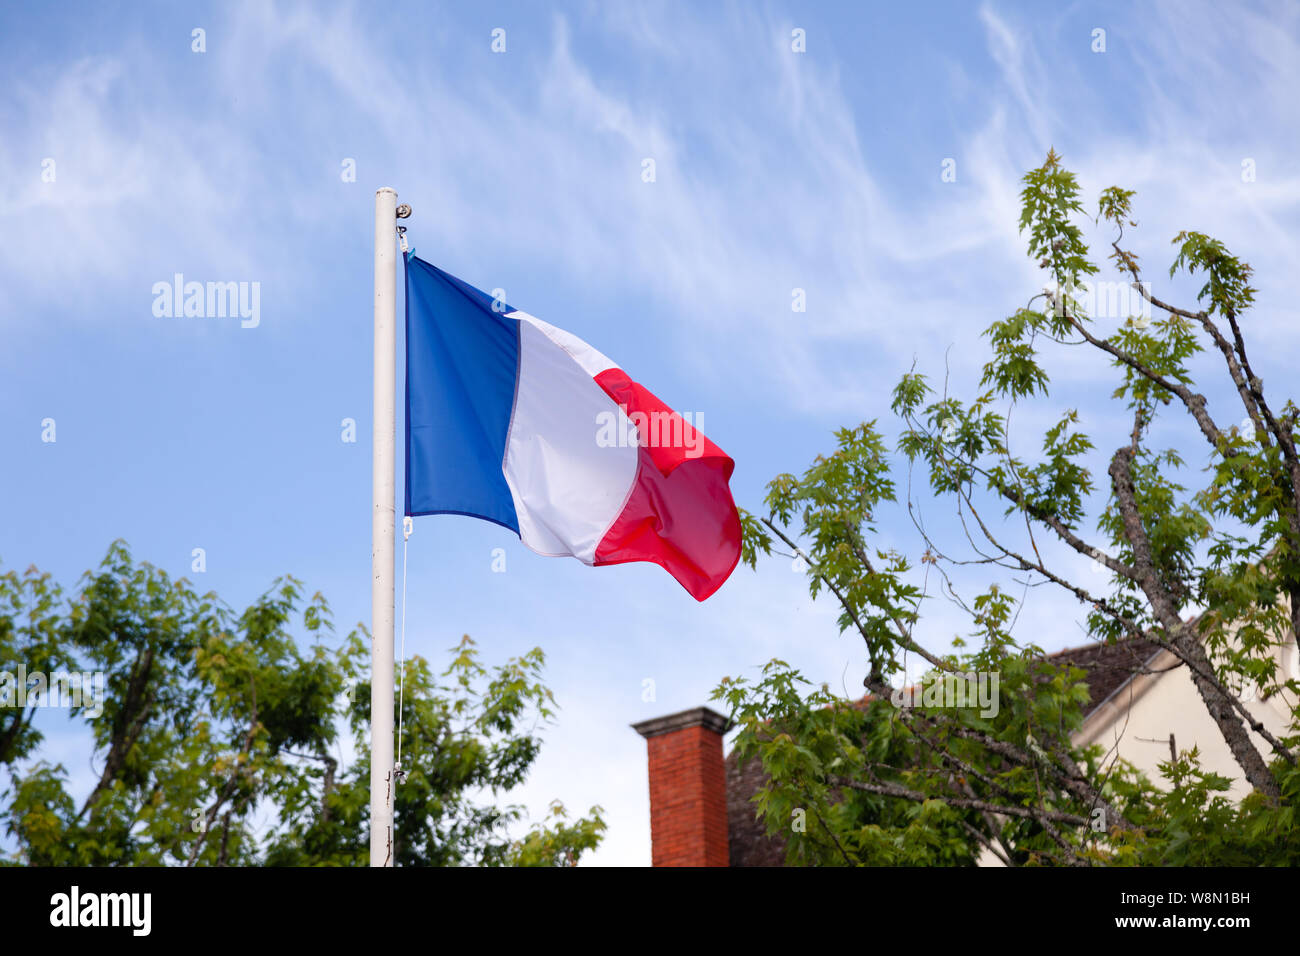 vindue Synes godt om Lure Flag of France, tricolor red white blue colors, fluttering, waving on  flagpole in wind against sky and clouds, branches of tree with green leaves  and Stock Photo - Alamy